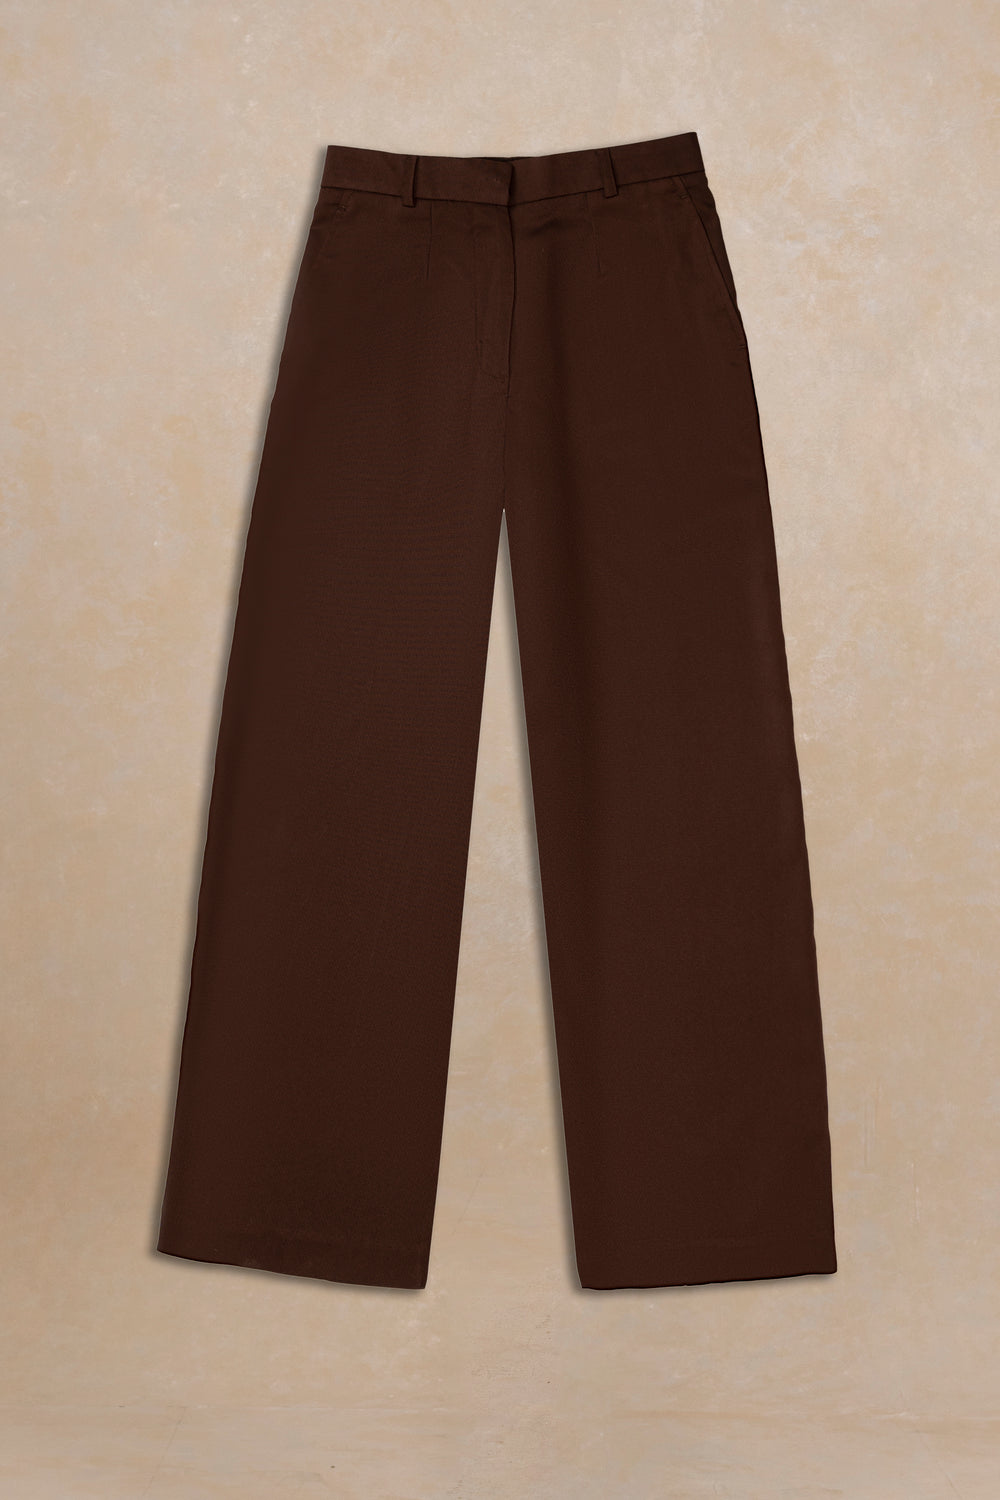 Brown Palazzo Pants for women